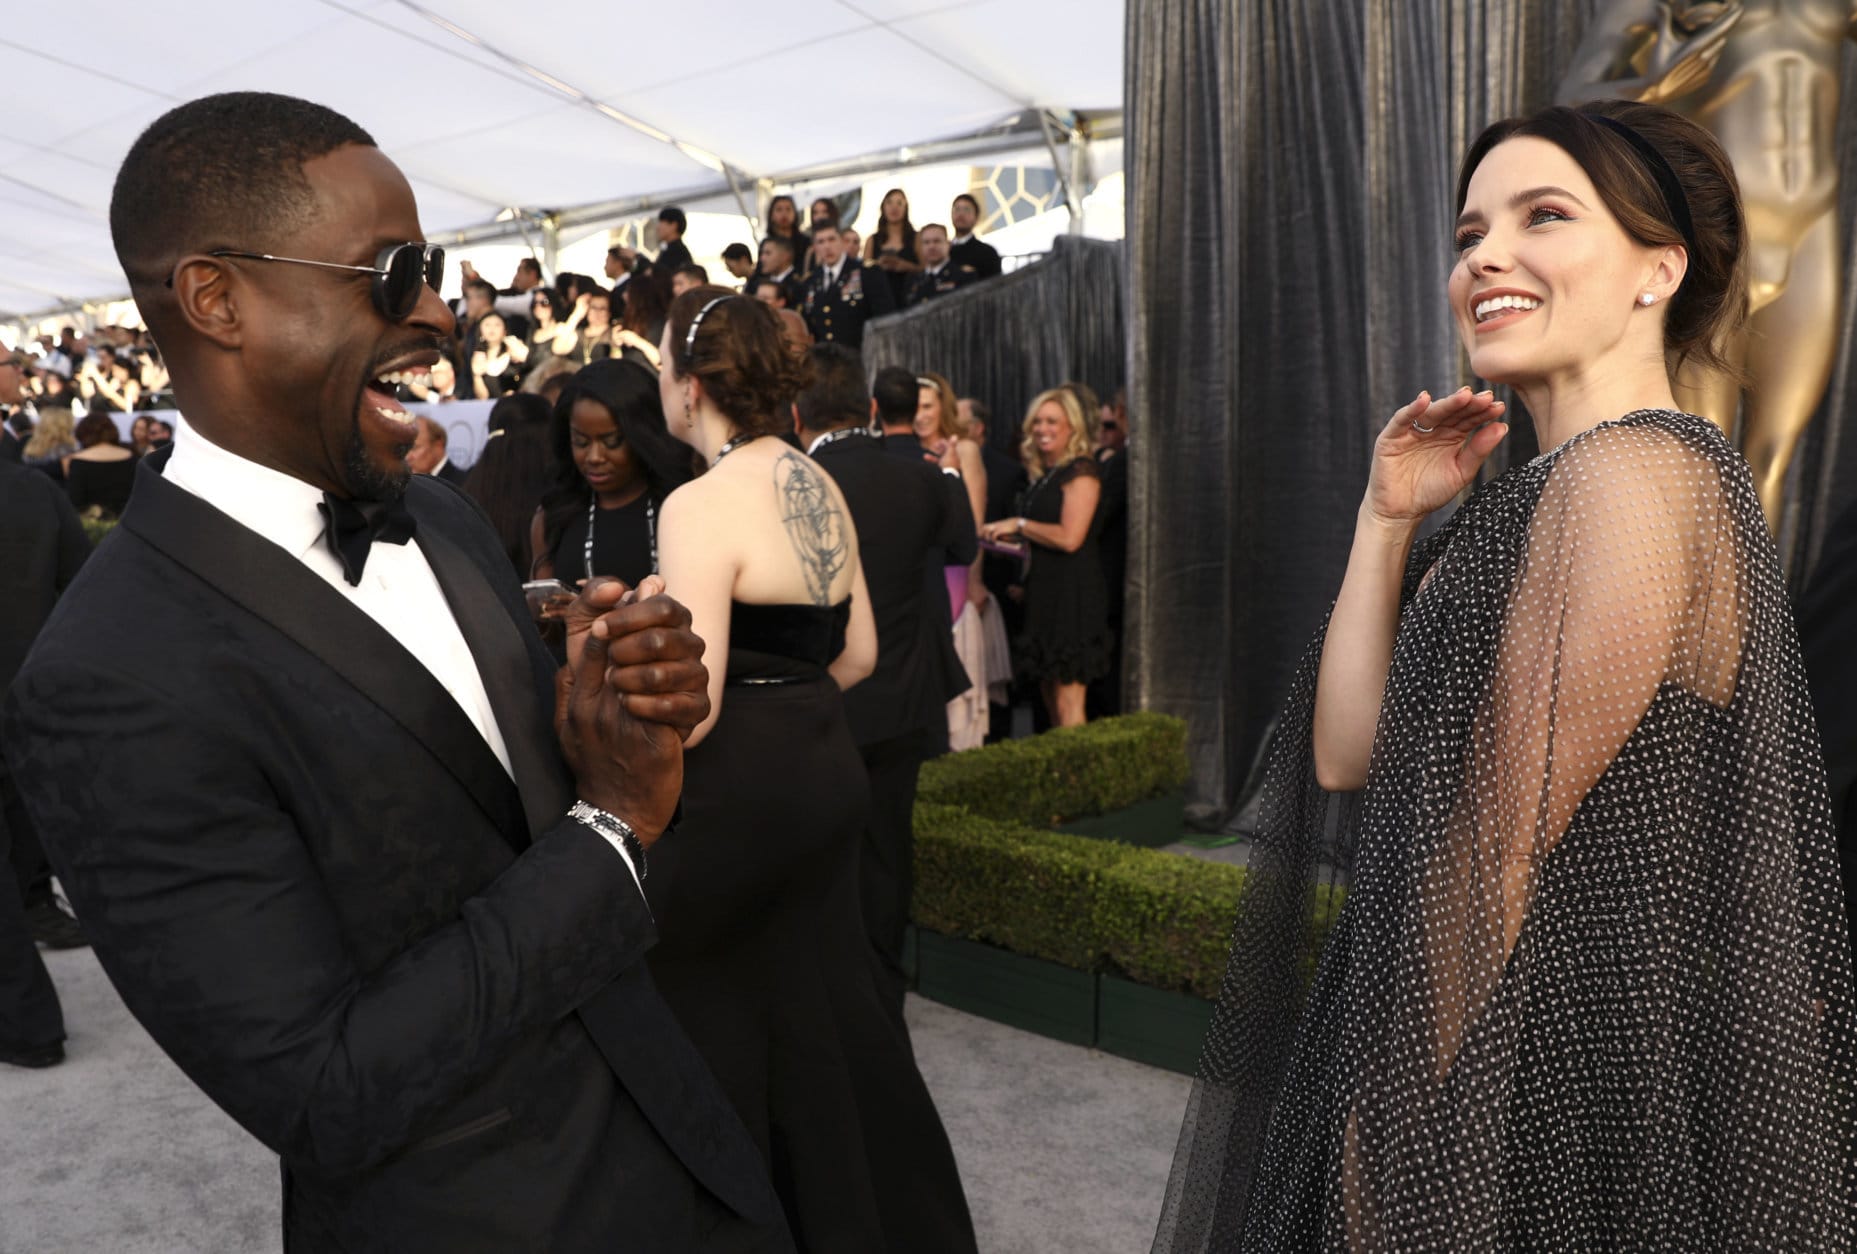 Sterling K. Brown, left, and Sophia Bush appear at the 25th annual Screen Actors Guild Awards at the Shrine Auditorium &amp; Expo Hall on Sunday, Jan. 27, 2019, in Los Angeles. (Photo by Matt Sayles/Invision/AP)